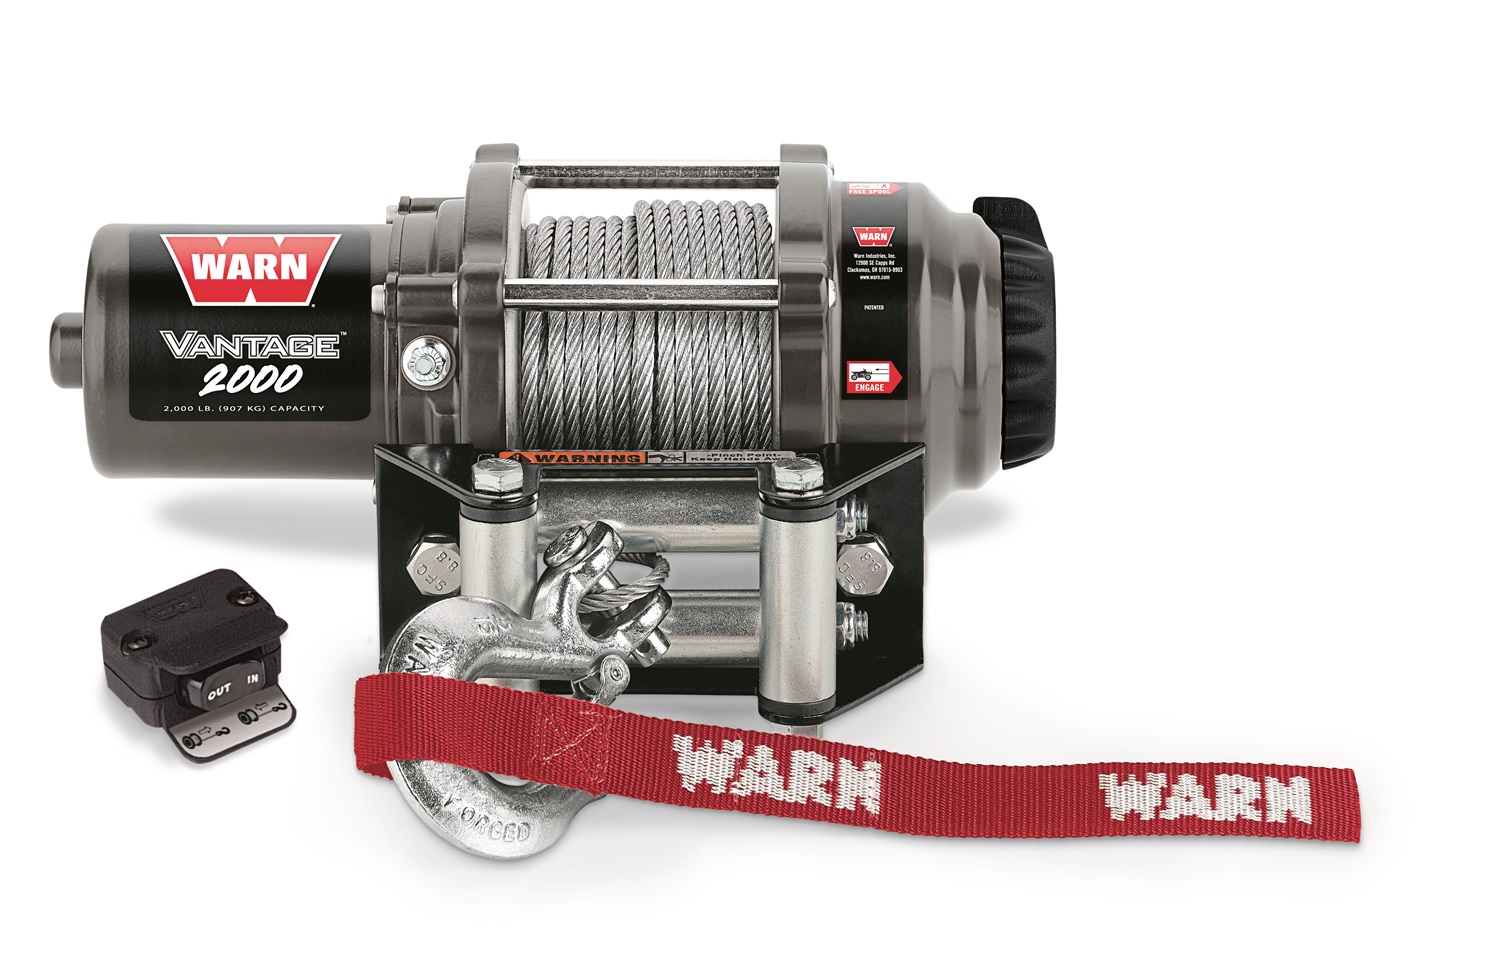 89020 Vantage 2000  Winch  2000 lbs./907 kg  12V Permanent Magnet Motor  50 ft. Wire Rope